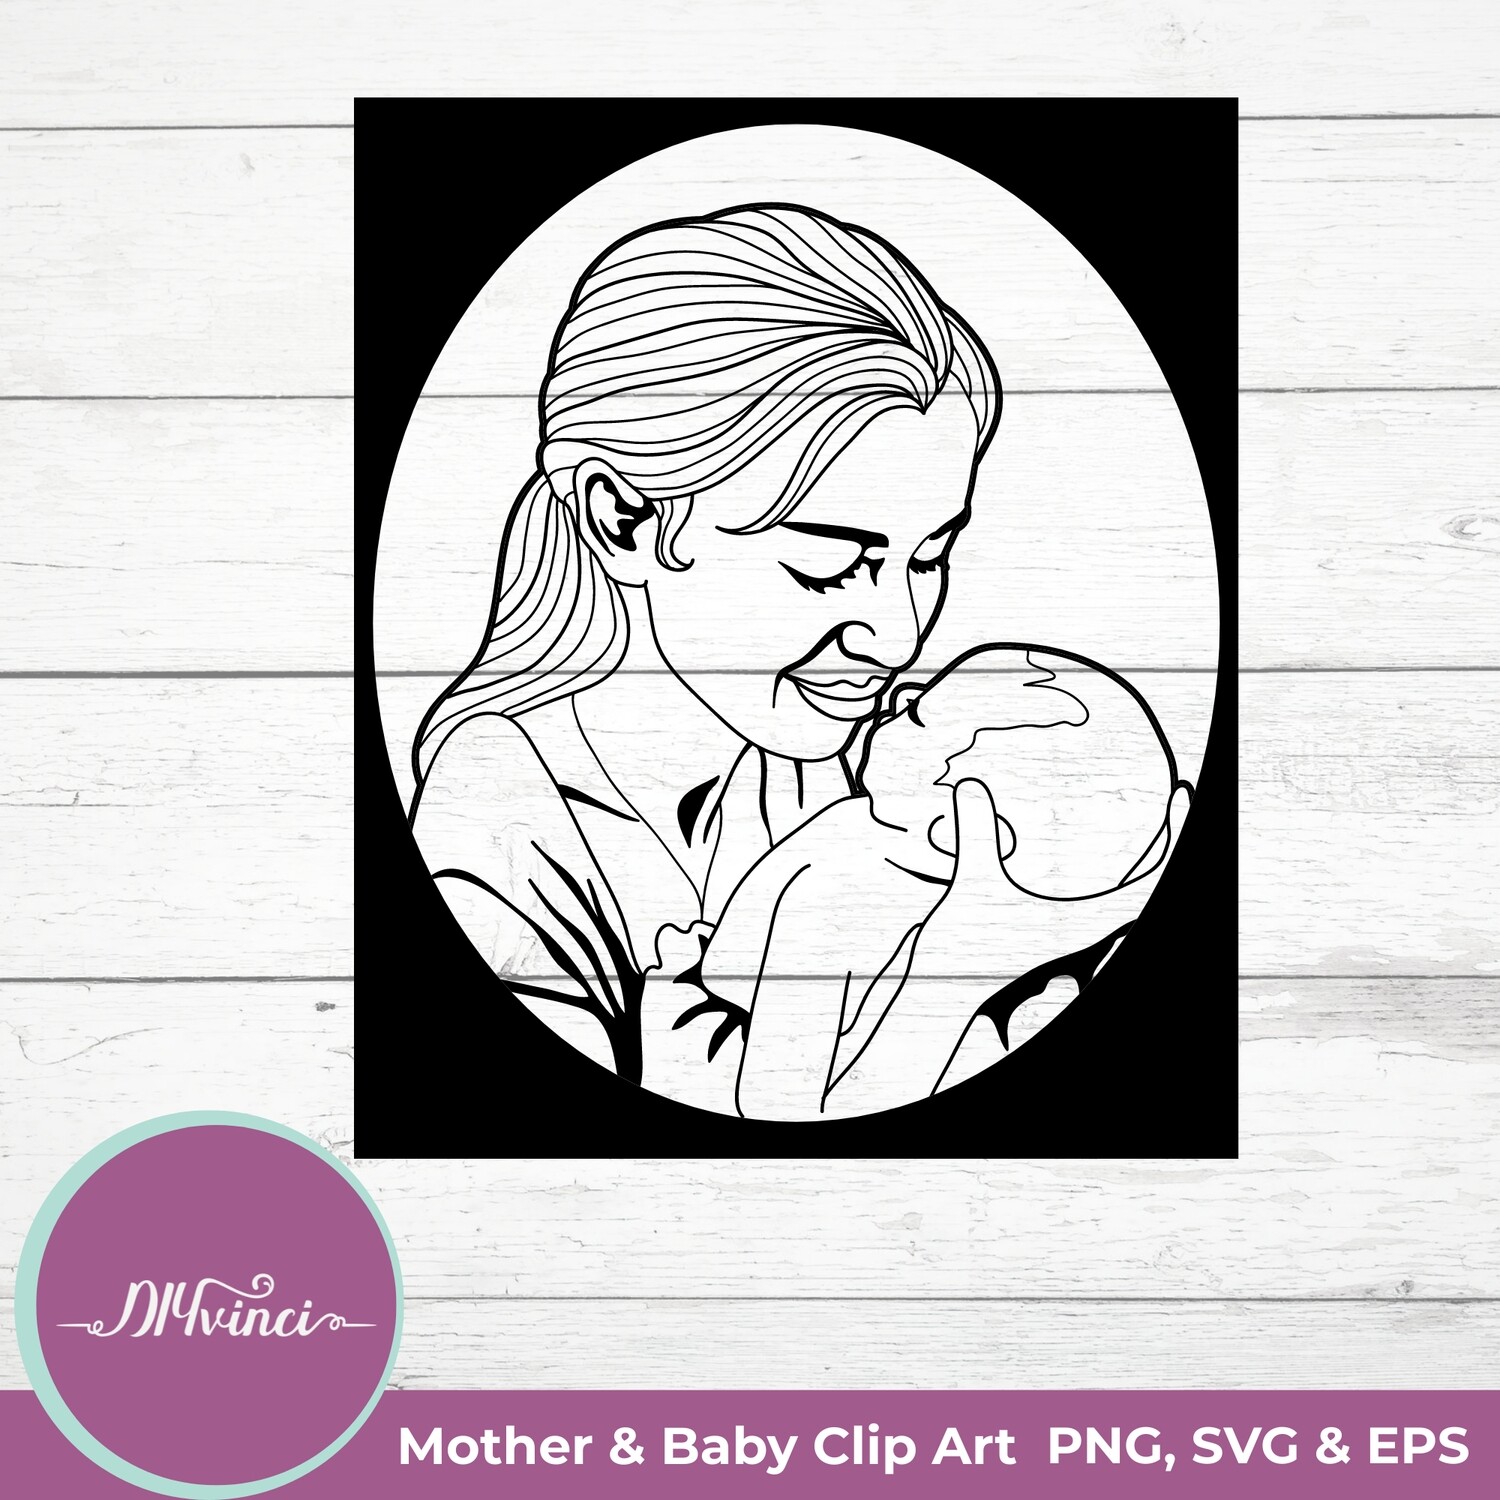 Mother and Baby Clip Art - PNG, SVG, EPS - Personal & Commercial Use